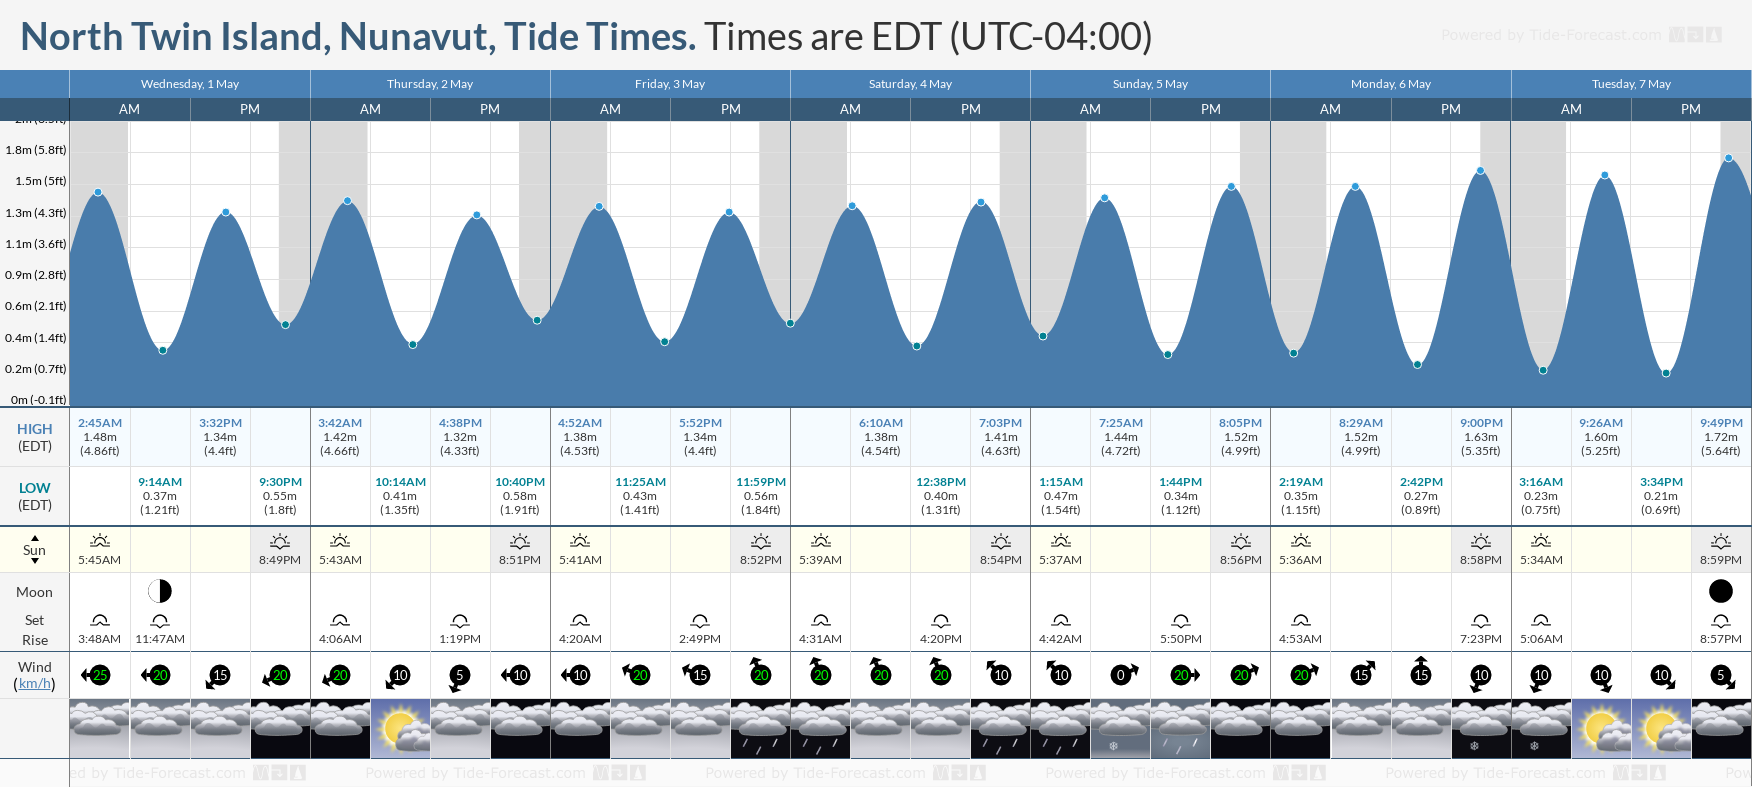 North Twin Island, Nunavut Tide Chart including high and low tide tide times for the next 7 days